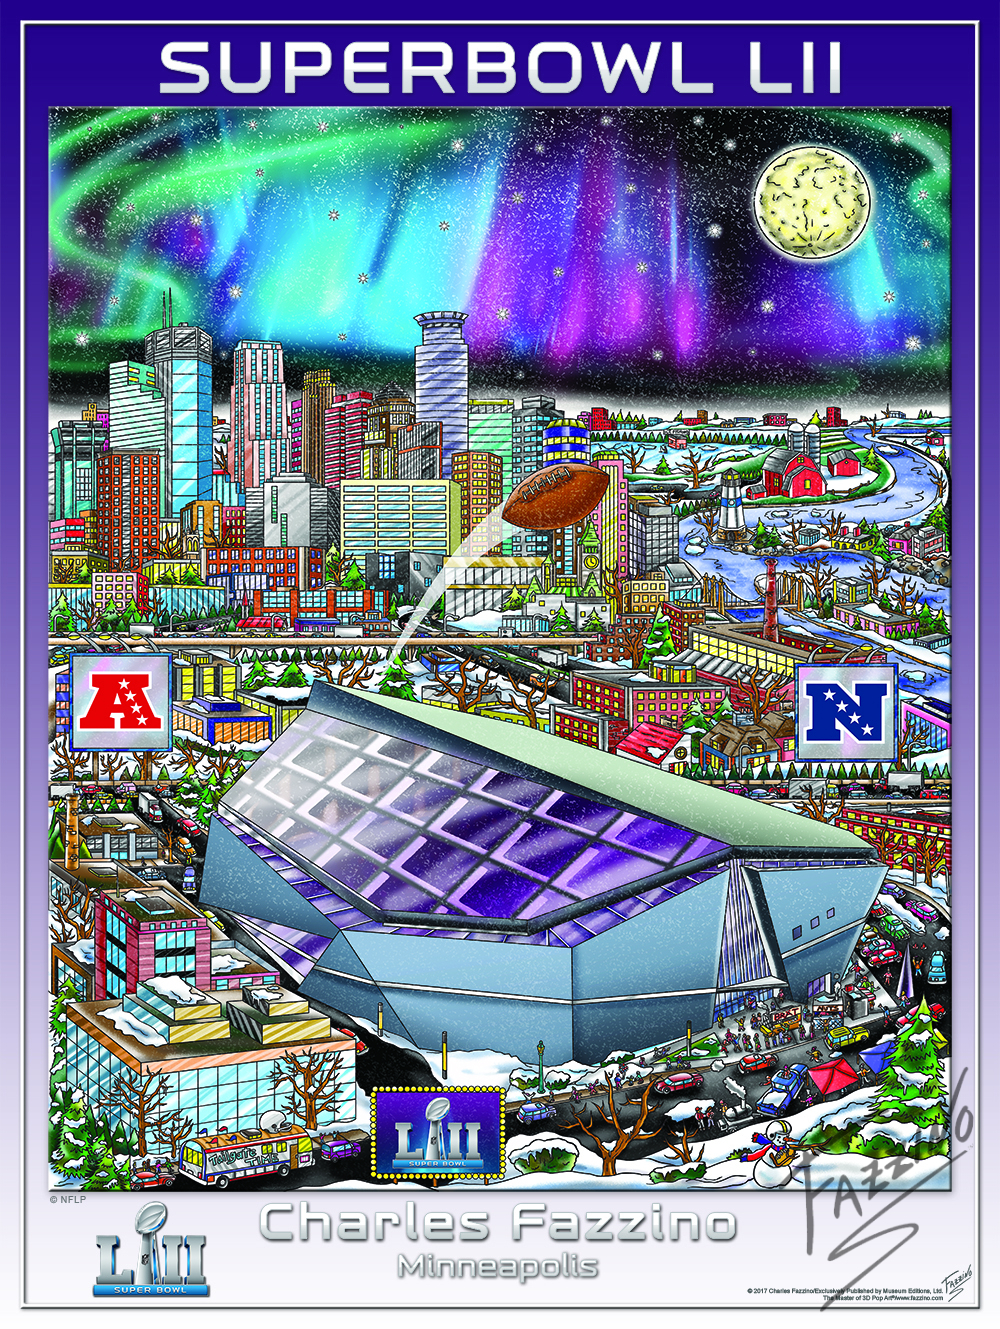 NFL Fazzino Superbowl LII poster or Minneapolis Stadium with aurora lights in the sky 